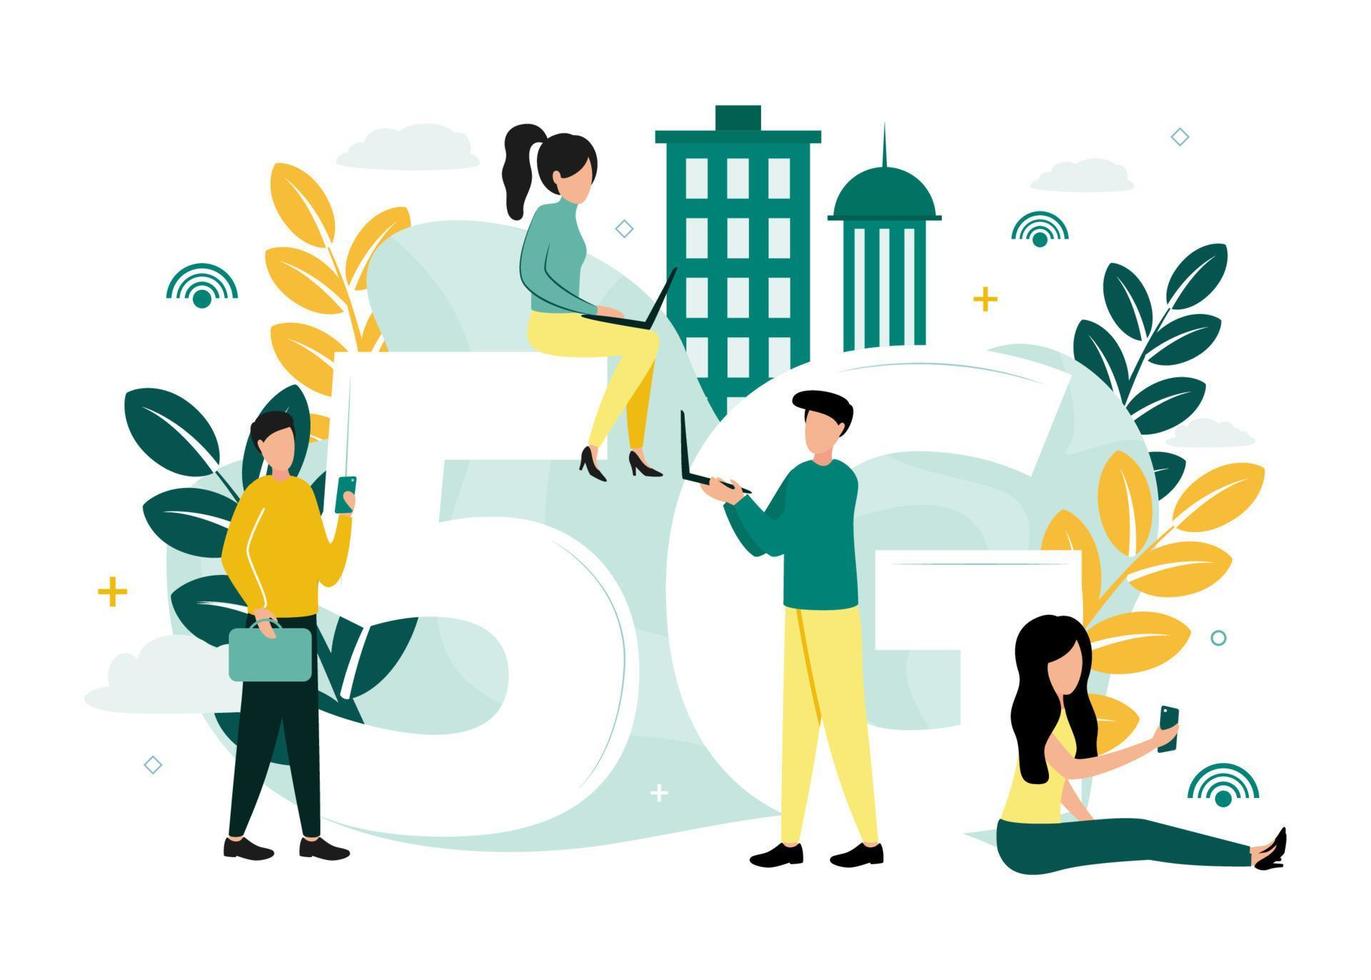 Vector illustration of 5G internet. Men and women with smartphones and laptops near the letter G and the number 5, on the background of the network icon, towers, plants.